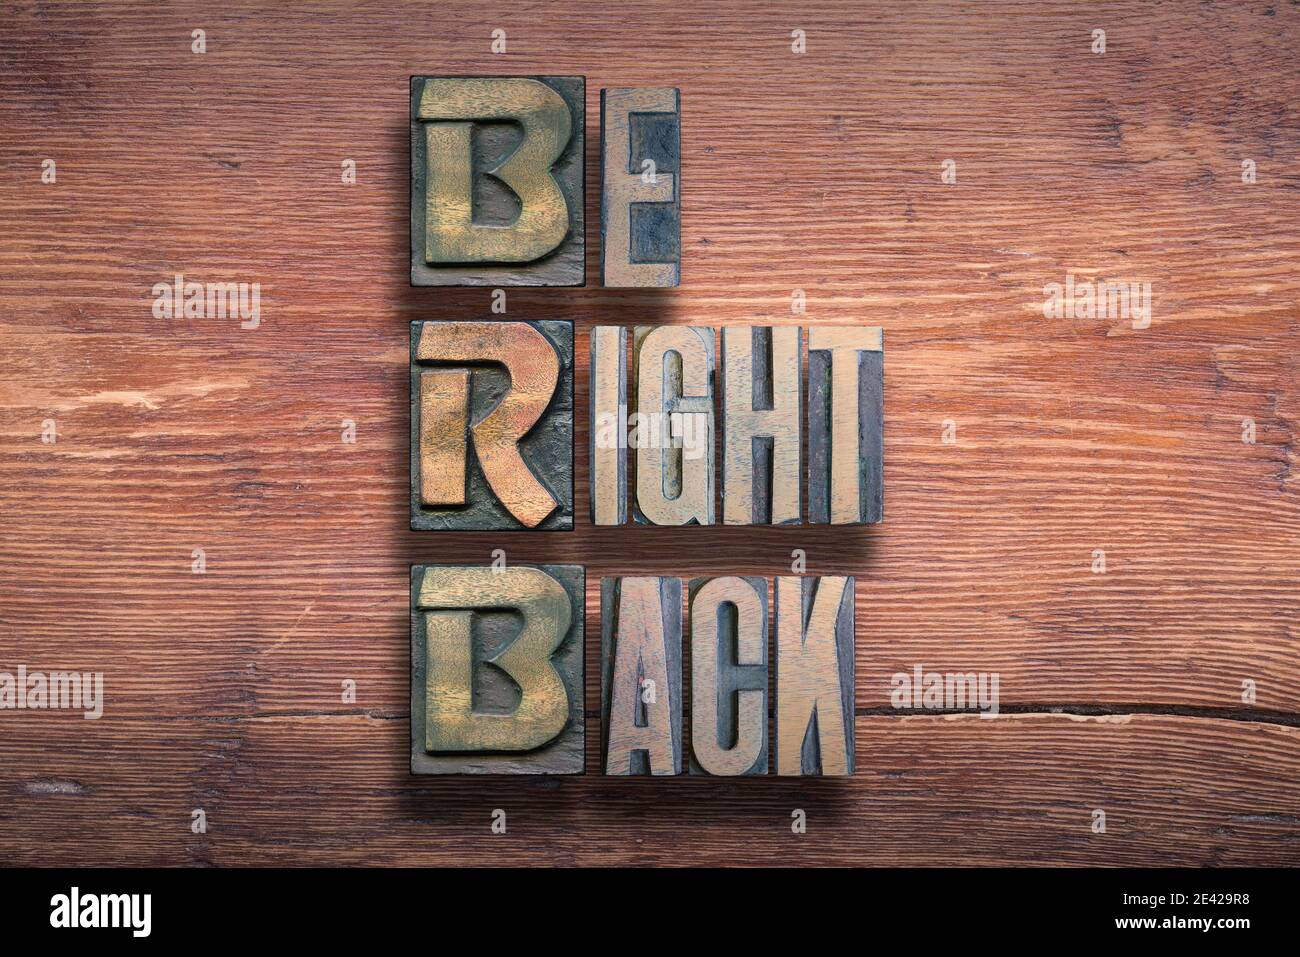 be right back abbreviation combined on vintage varnished wooden surface Stock Photo